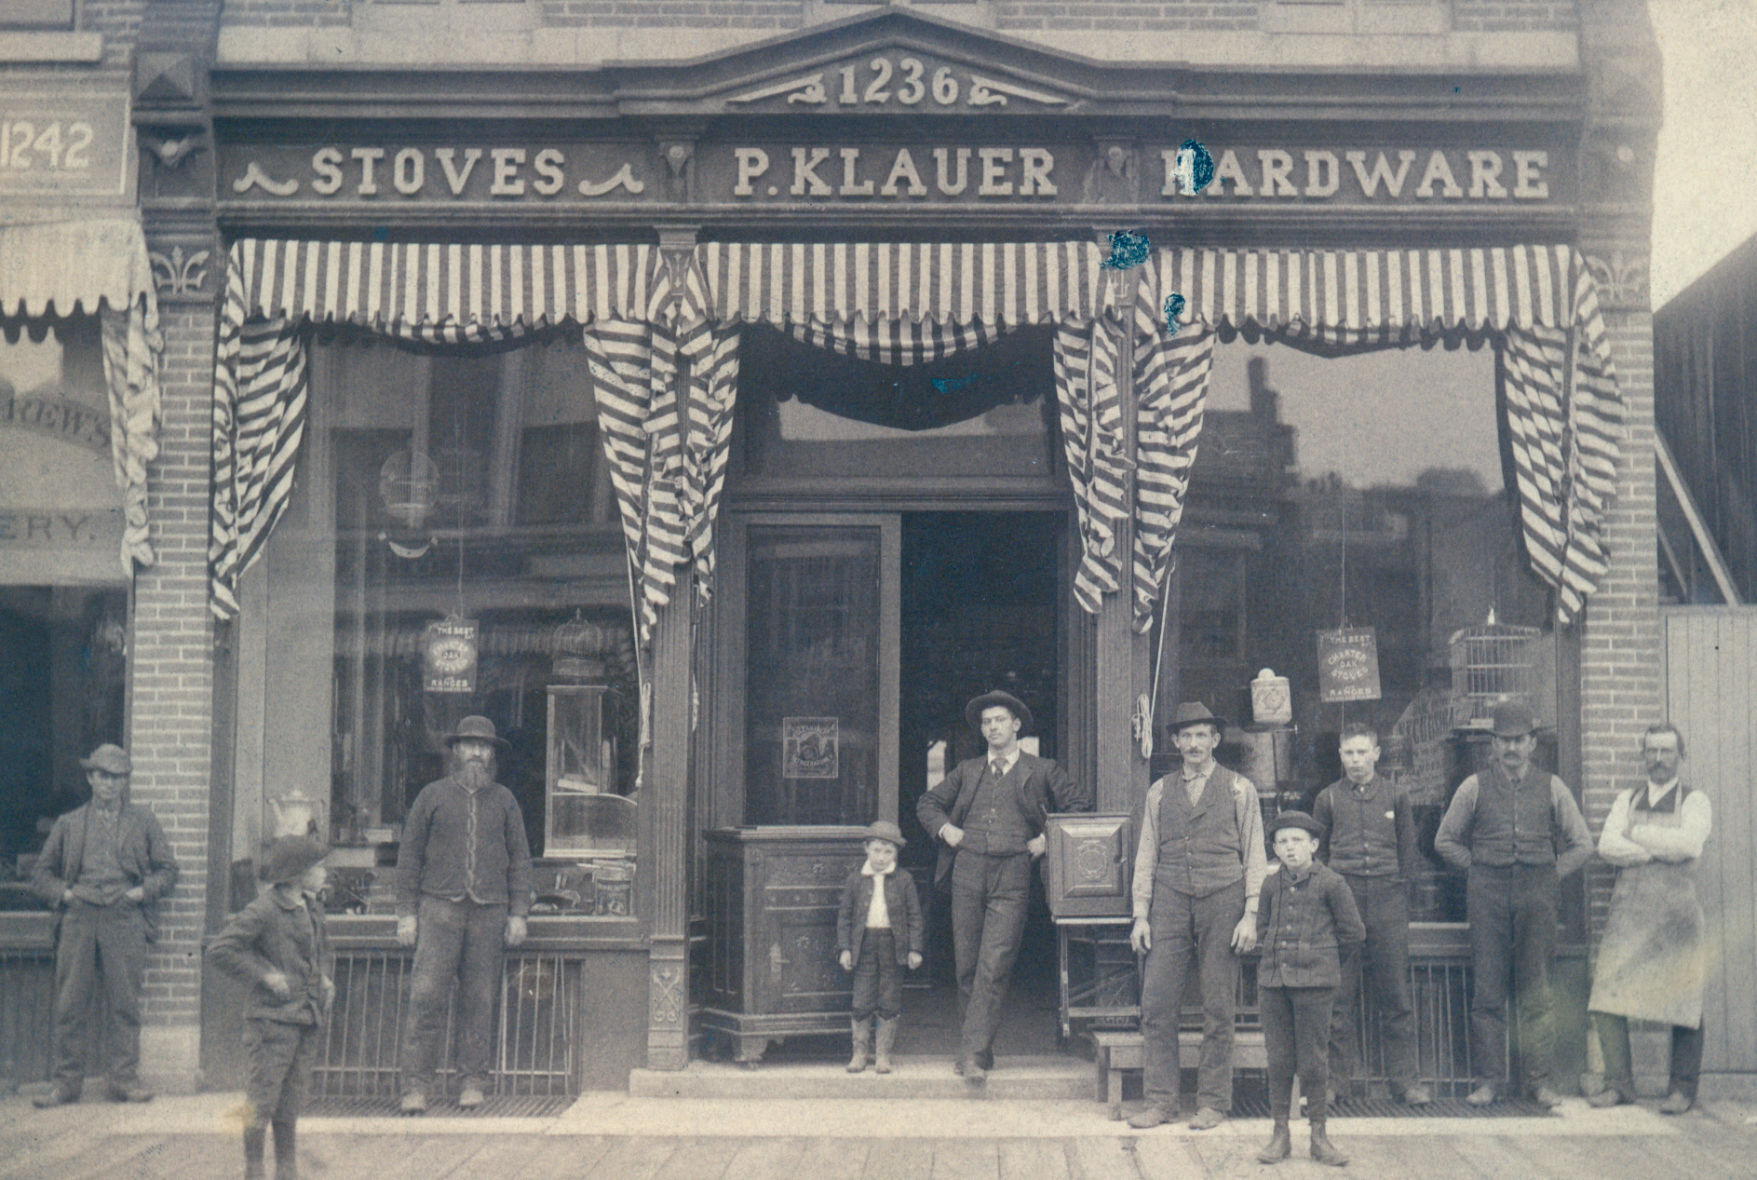 Klauer Manufacturing storefront (circa 1890), east side of Iowa Street between 12th and 13th. Standing in the doorway is William H. Klauer, son of the founder, who was the impetus behind transforming the business from a local shop to a large manufacturer. PHOTO CREDIT: Contributed